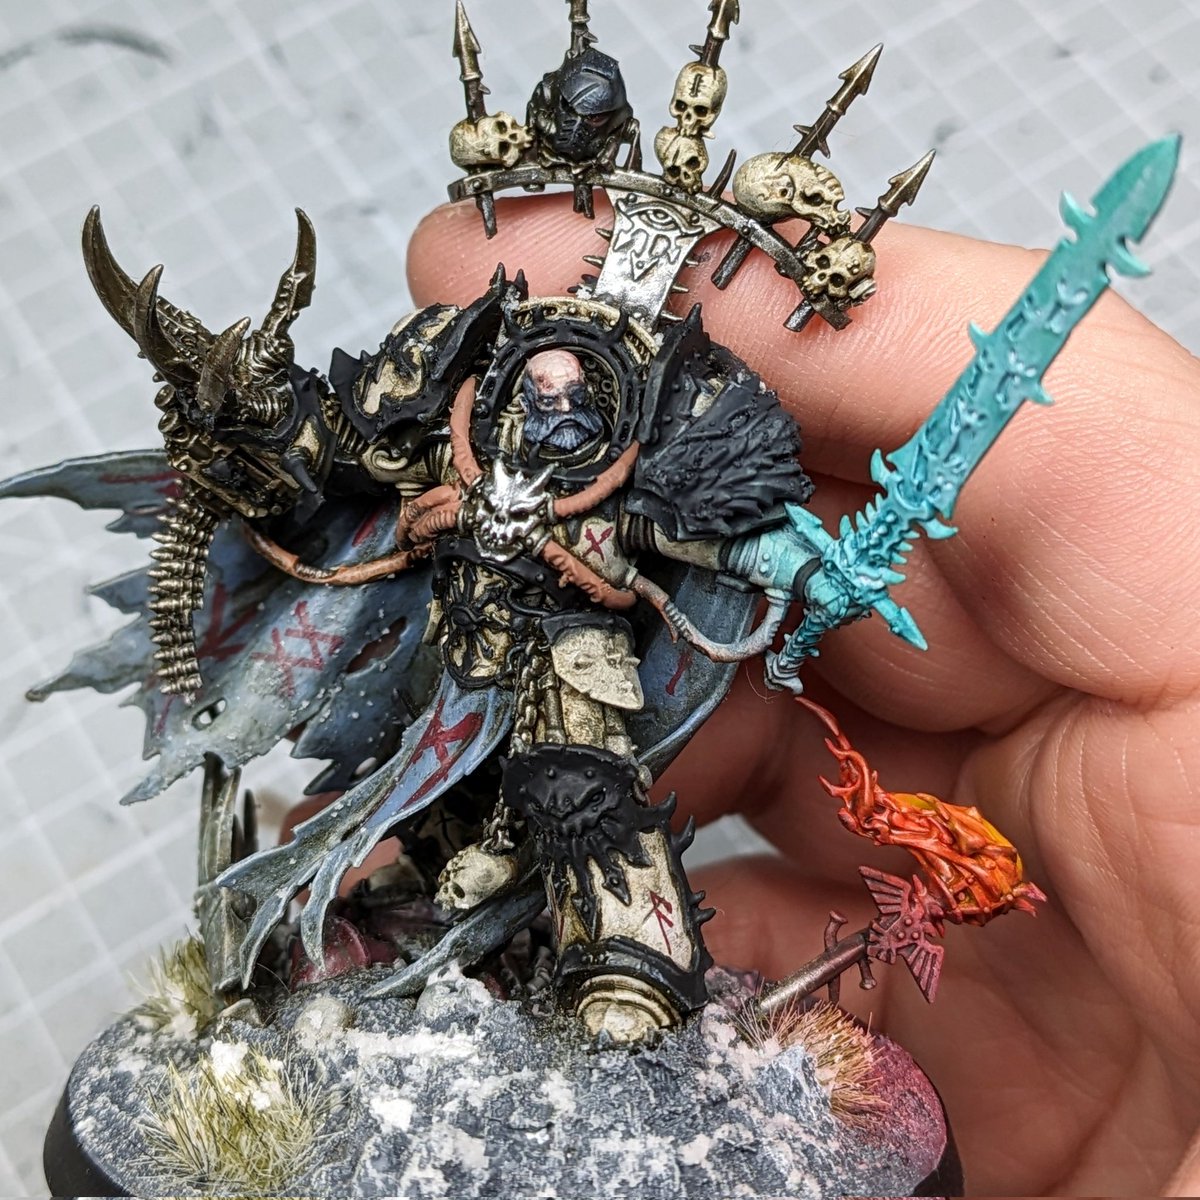 With the CSM book now confirmed for 2 weeks time I wanted to give Old Man Abaddon a facelift!

The plan is to have him fully revitalised before the book drops 😁🤘🏻

#warhammercommunity